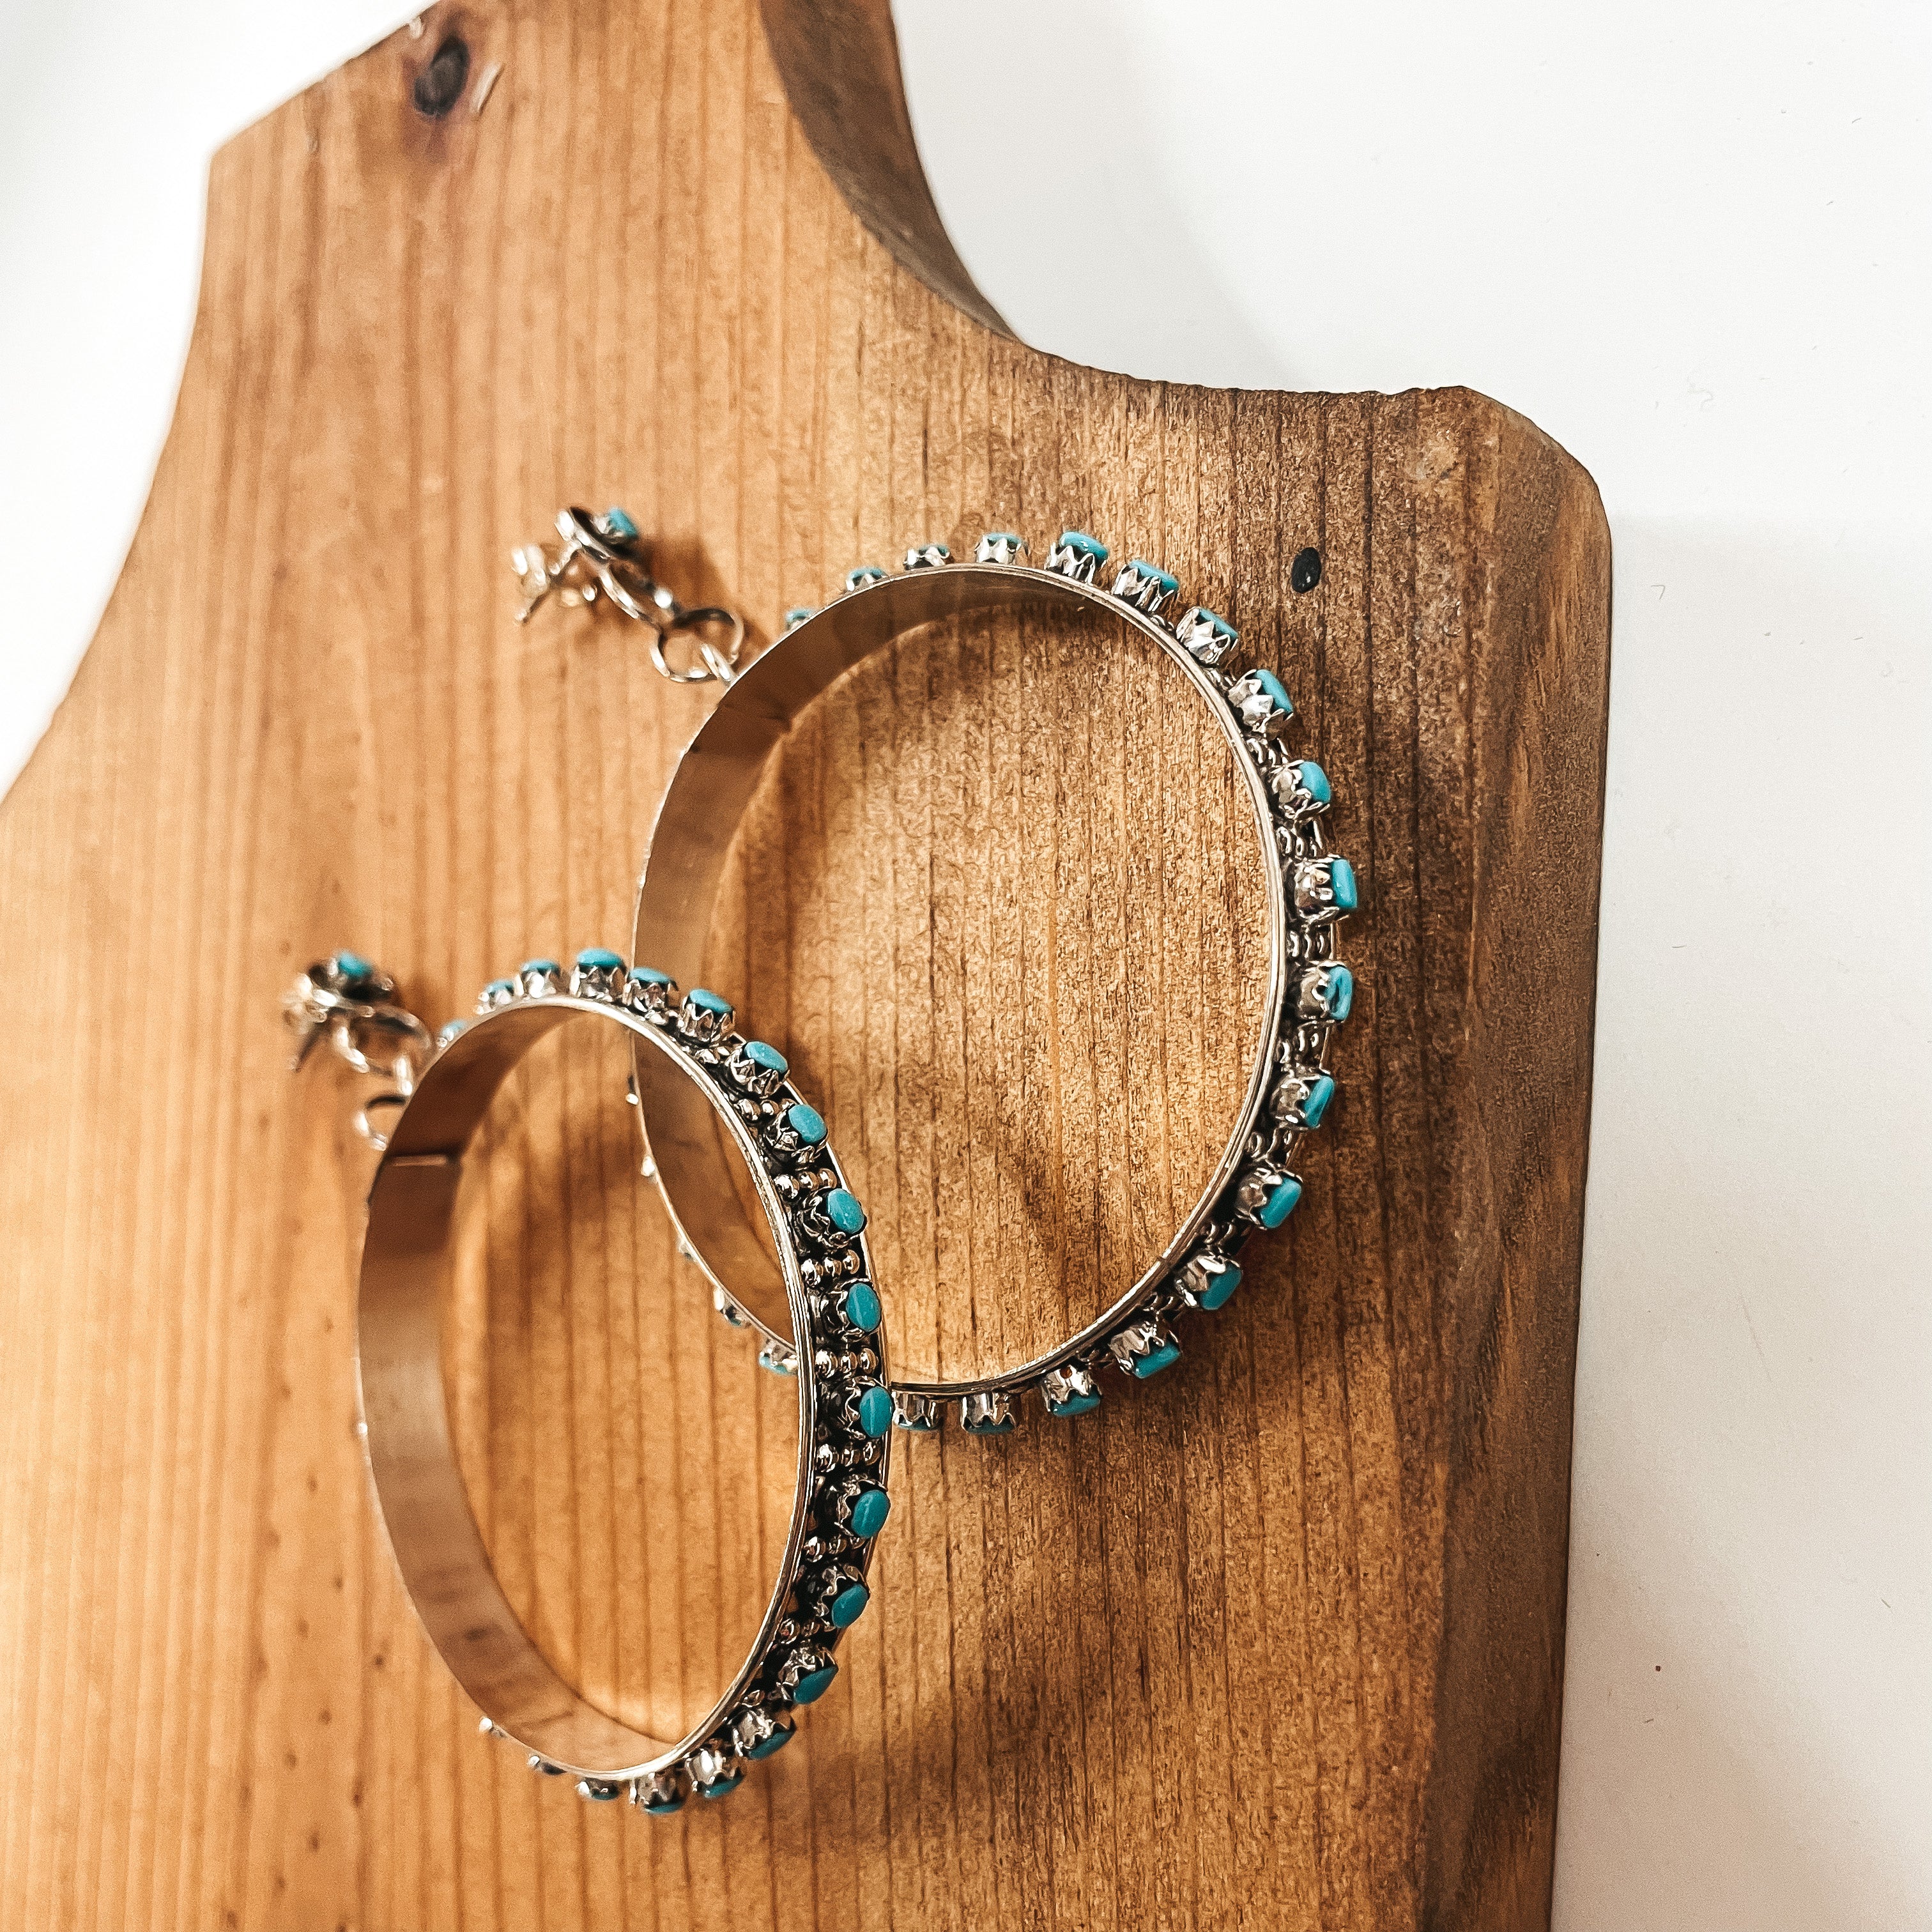 Zuni | Zuni Handmade Sterling Silver Circle Drop Earrings with Turquoise Stones - Giddy Up Glamour Boutique